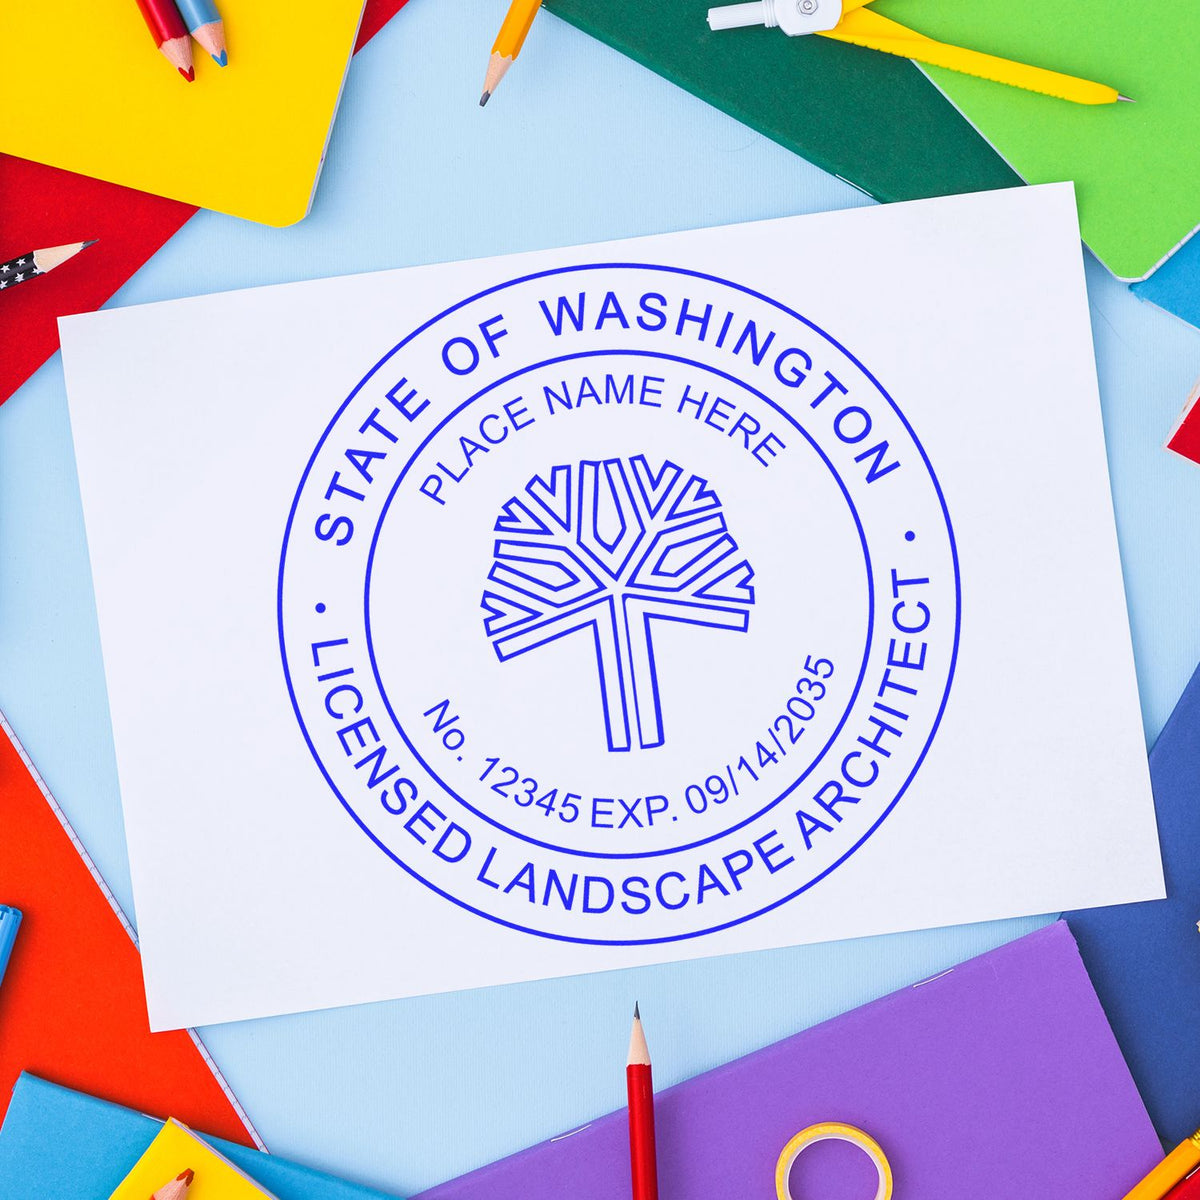 Washington Landscape Architectural Seal Stamp in use photo showing a stamped imprint of the Washington Landscape Architectural Seal Stamp